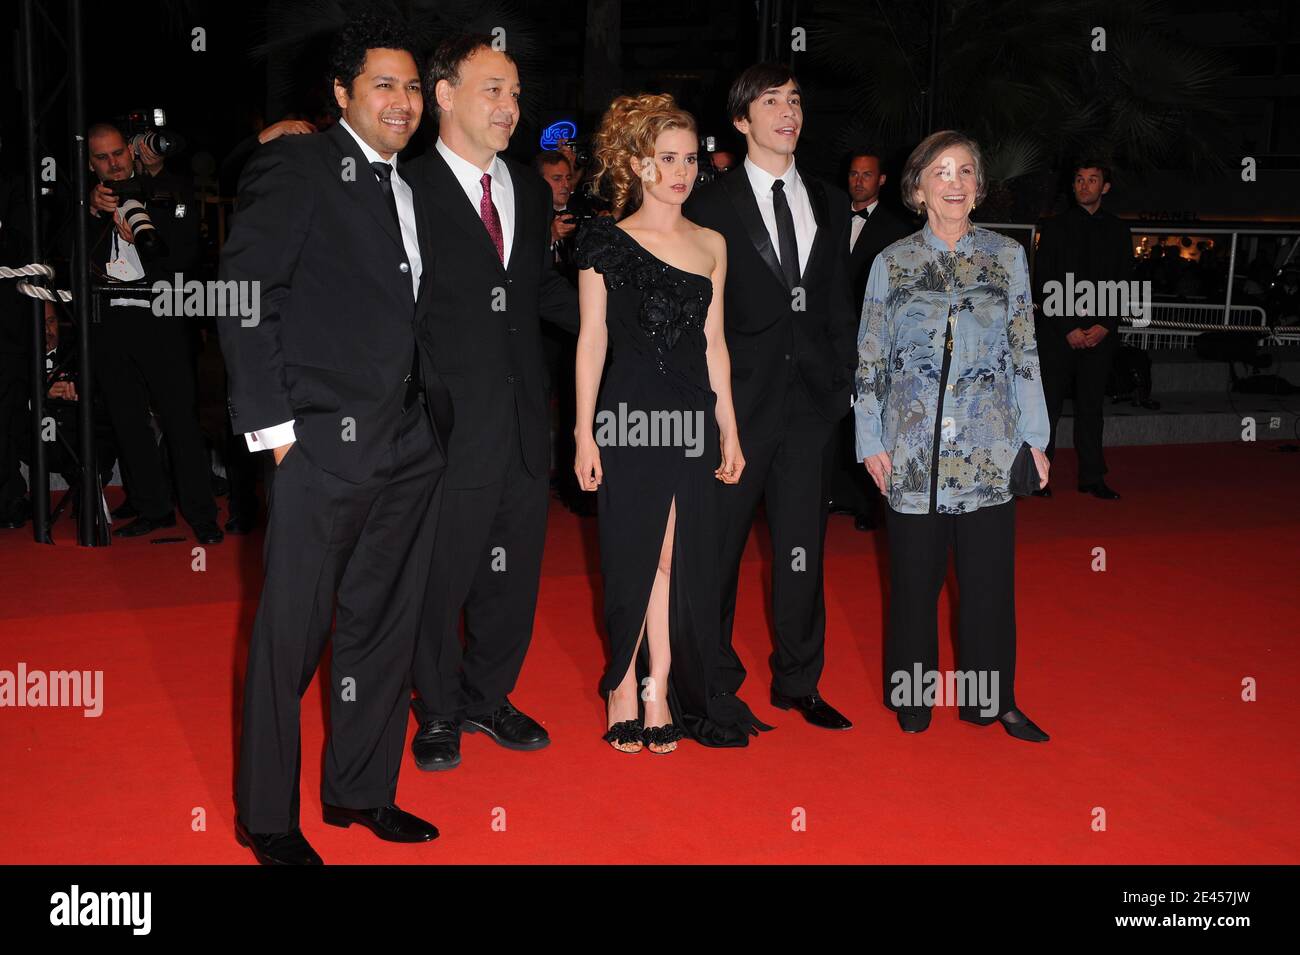 Lorna Raver, Justin Long, Alison Lohman, Sam Raimi and Dileep Rao arriving for the screening of 'Drag me to Hell' during the 62nd Cannes Film Festival at the Palais des Festivals in Cannes, France on May 20, 2009. Photo by Nebinger-Orban/ABACAPRESS.COM Stock Photo